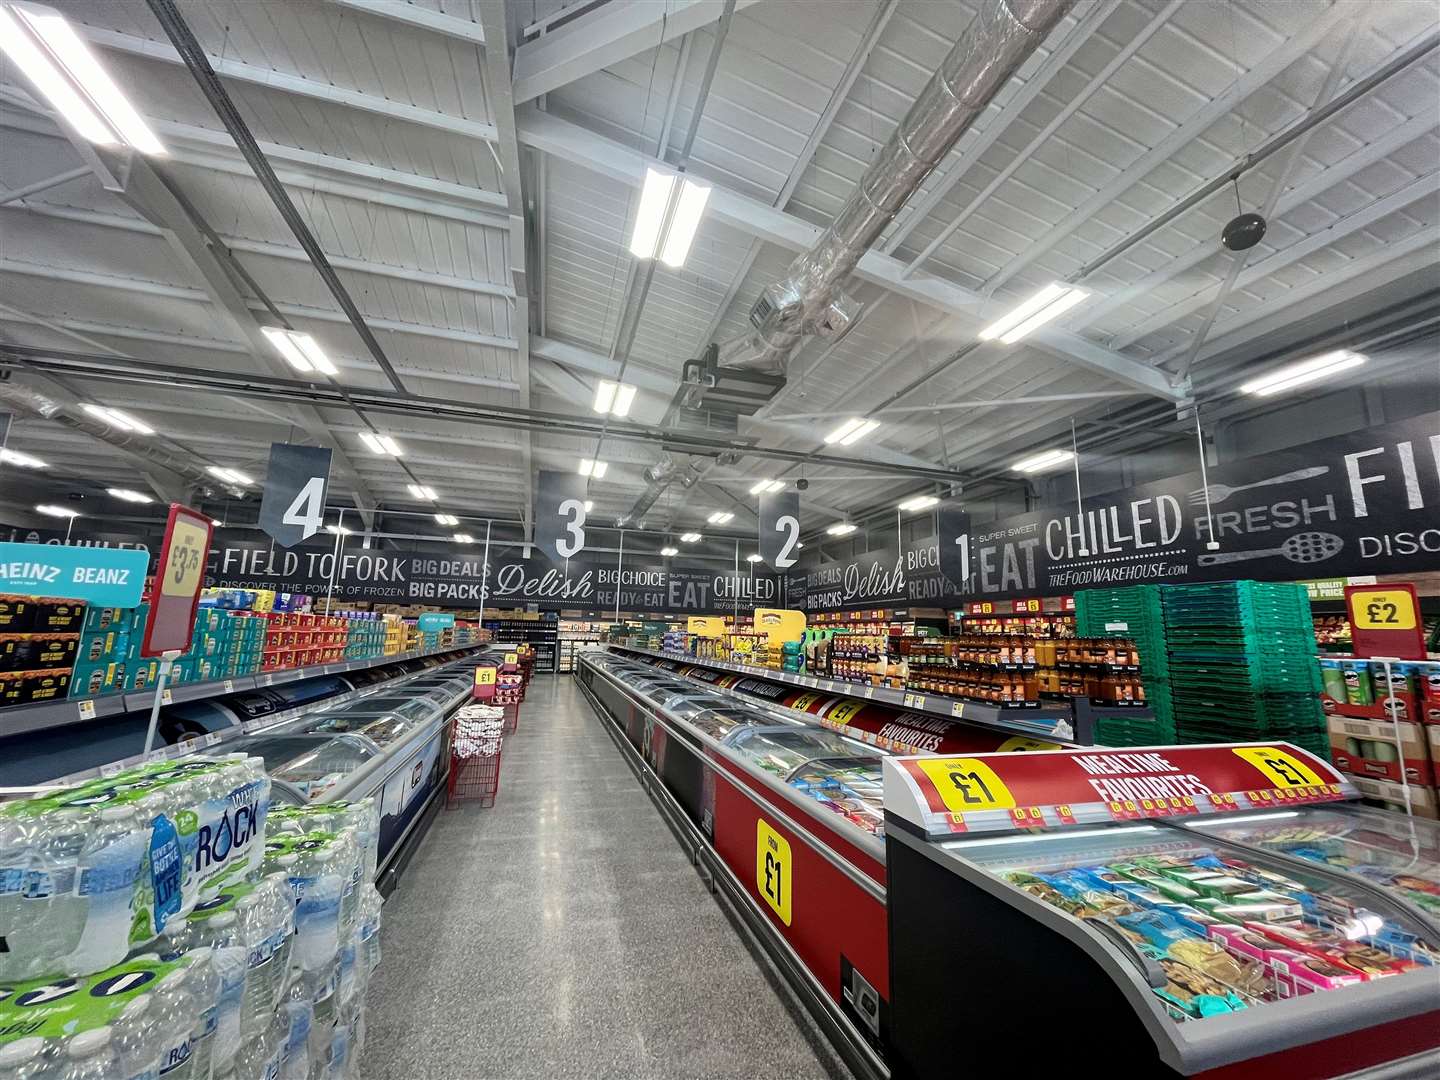 The huge shop offers seven aisles of products